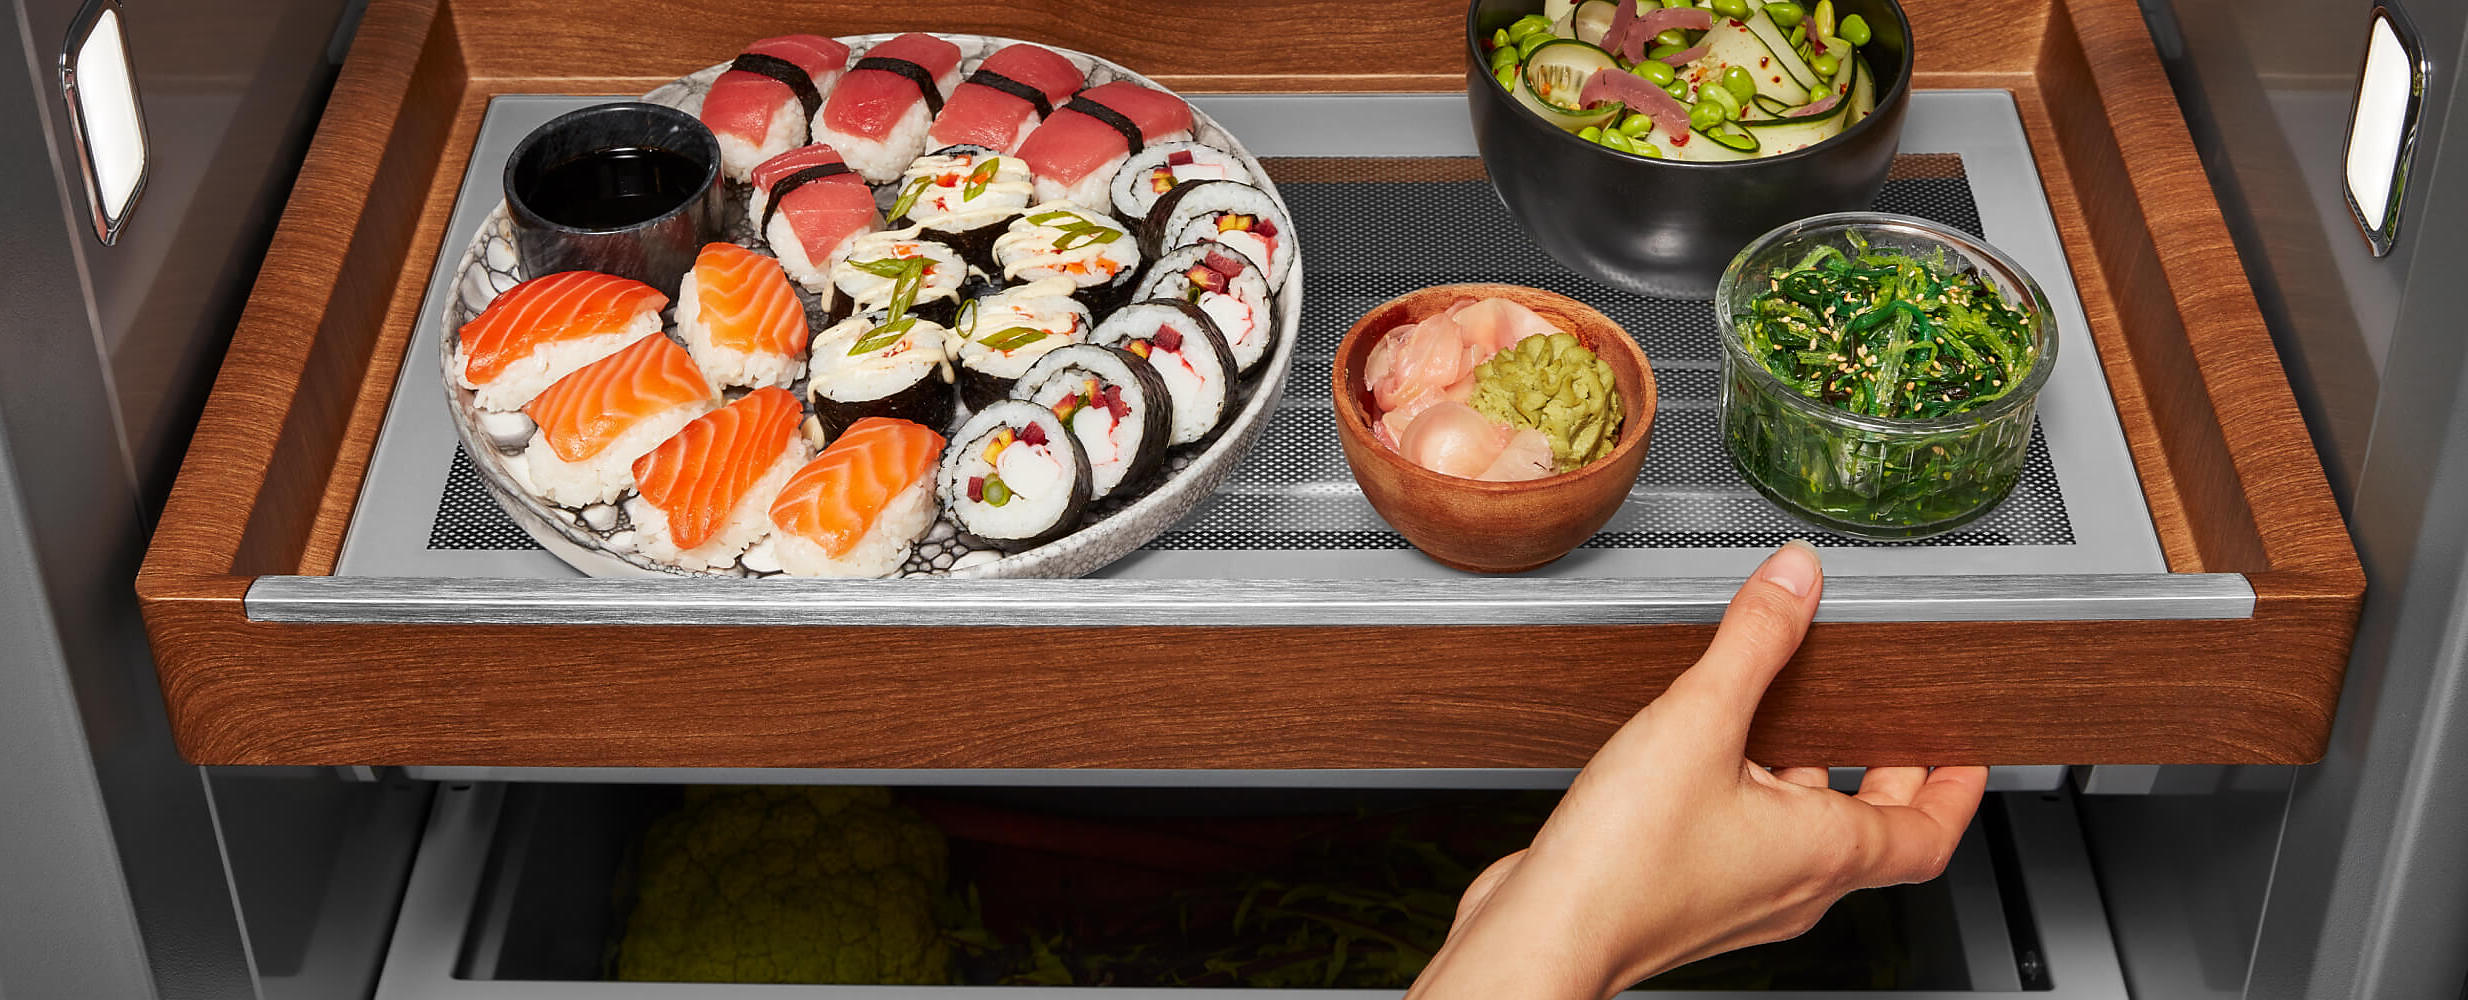 Sliding Storage Tray in a 48" KitchenAid® Built-In Side-by-Side Refrigerator holding sushi and other foods